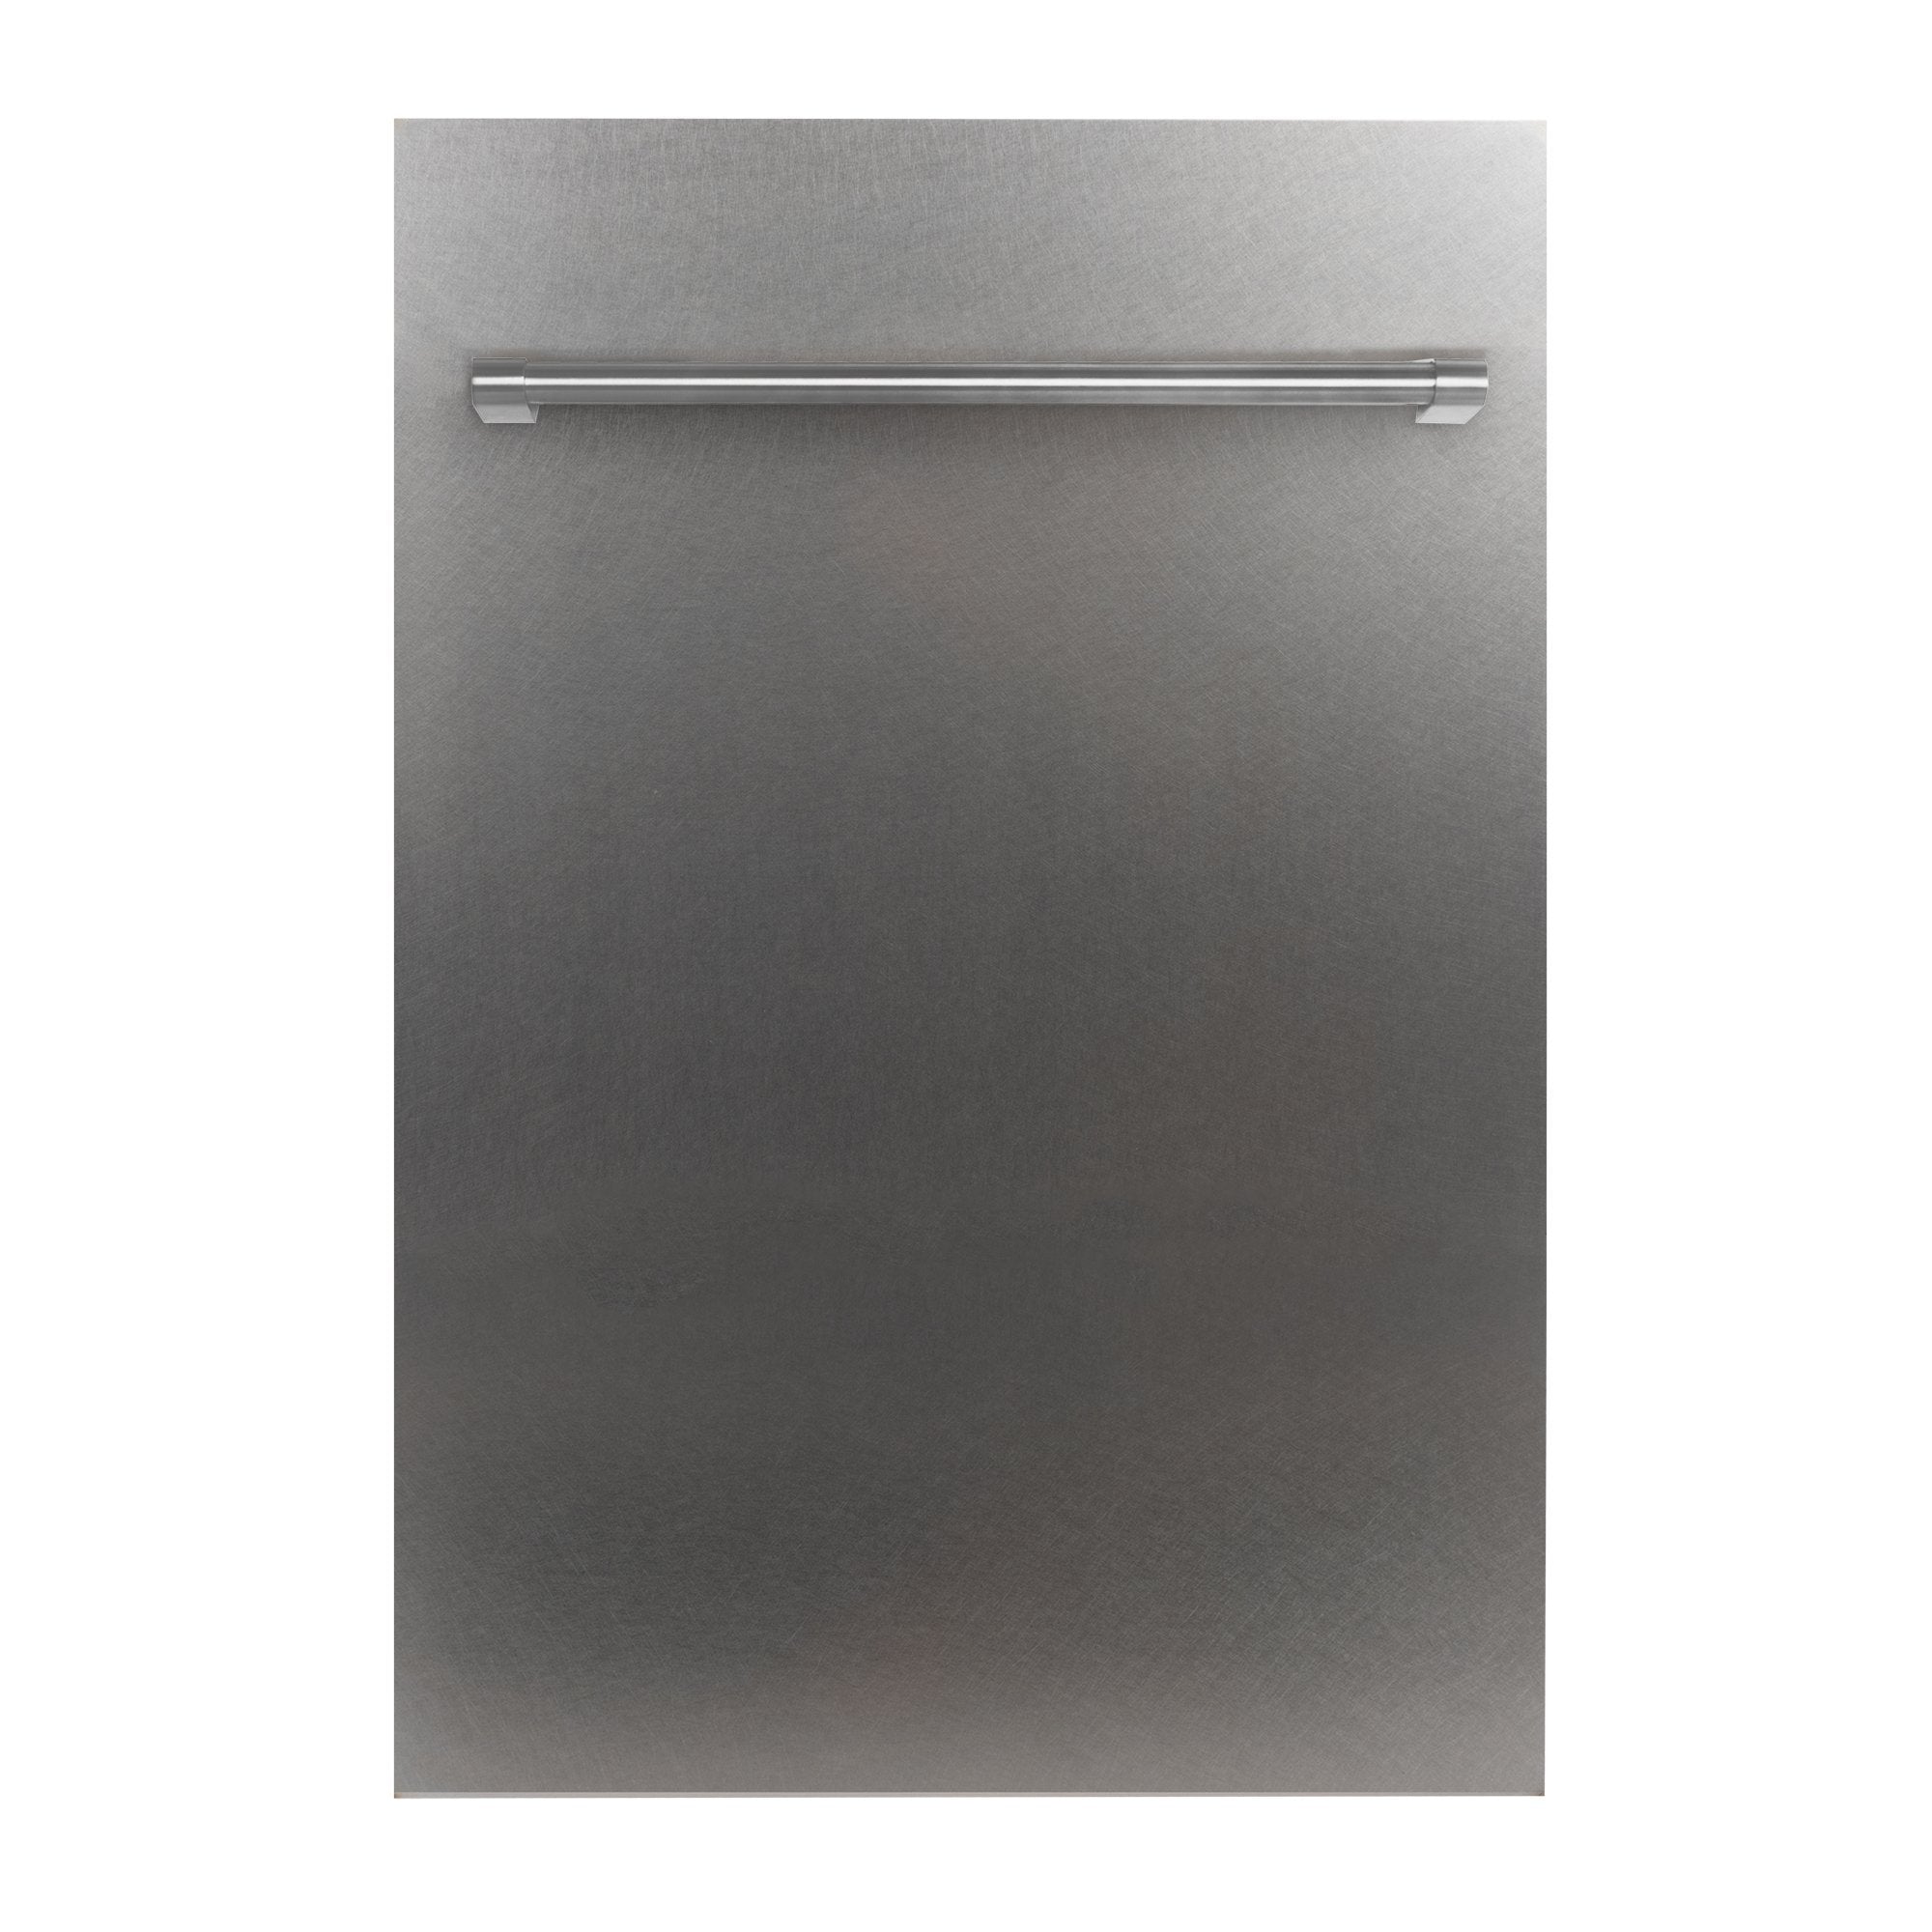 ZLINE Kitchen and Bath, ZLINE 18" Top Control Dishwasher with Stainless Steel Tub and Traditional Style Handle, DW-SS-H-18,